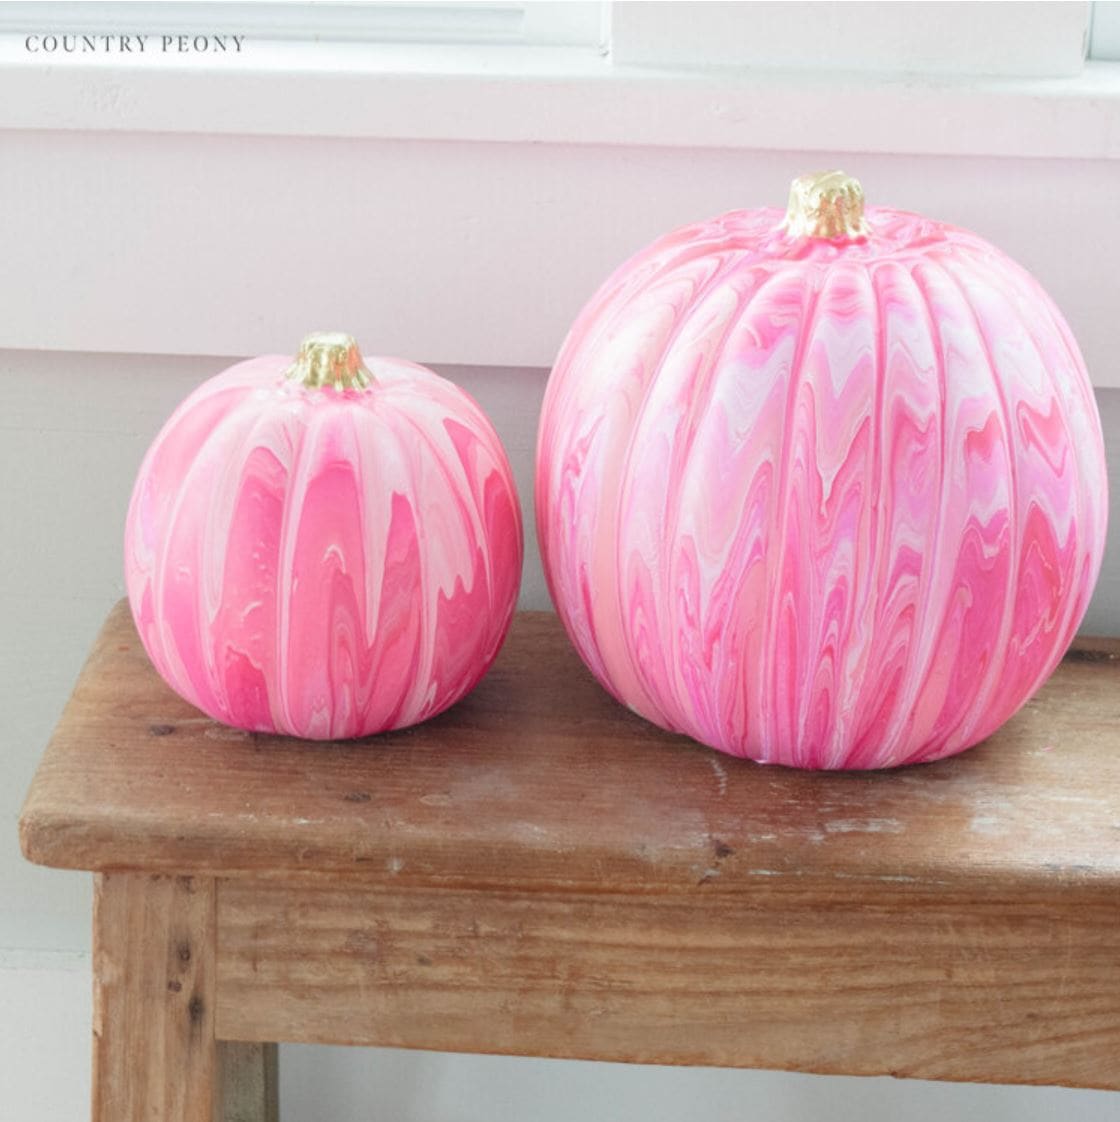 Two pink paint poured pumpkins on a wooden bench.